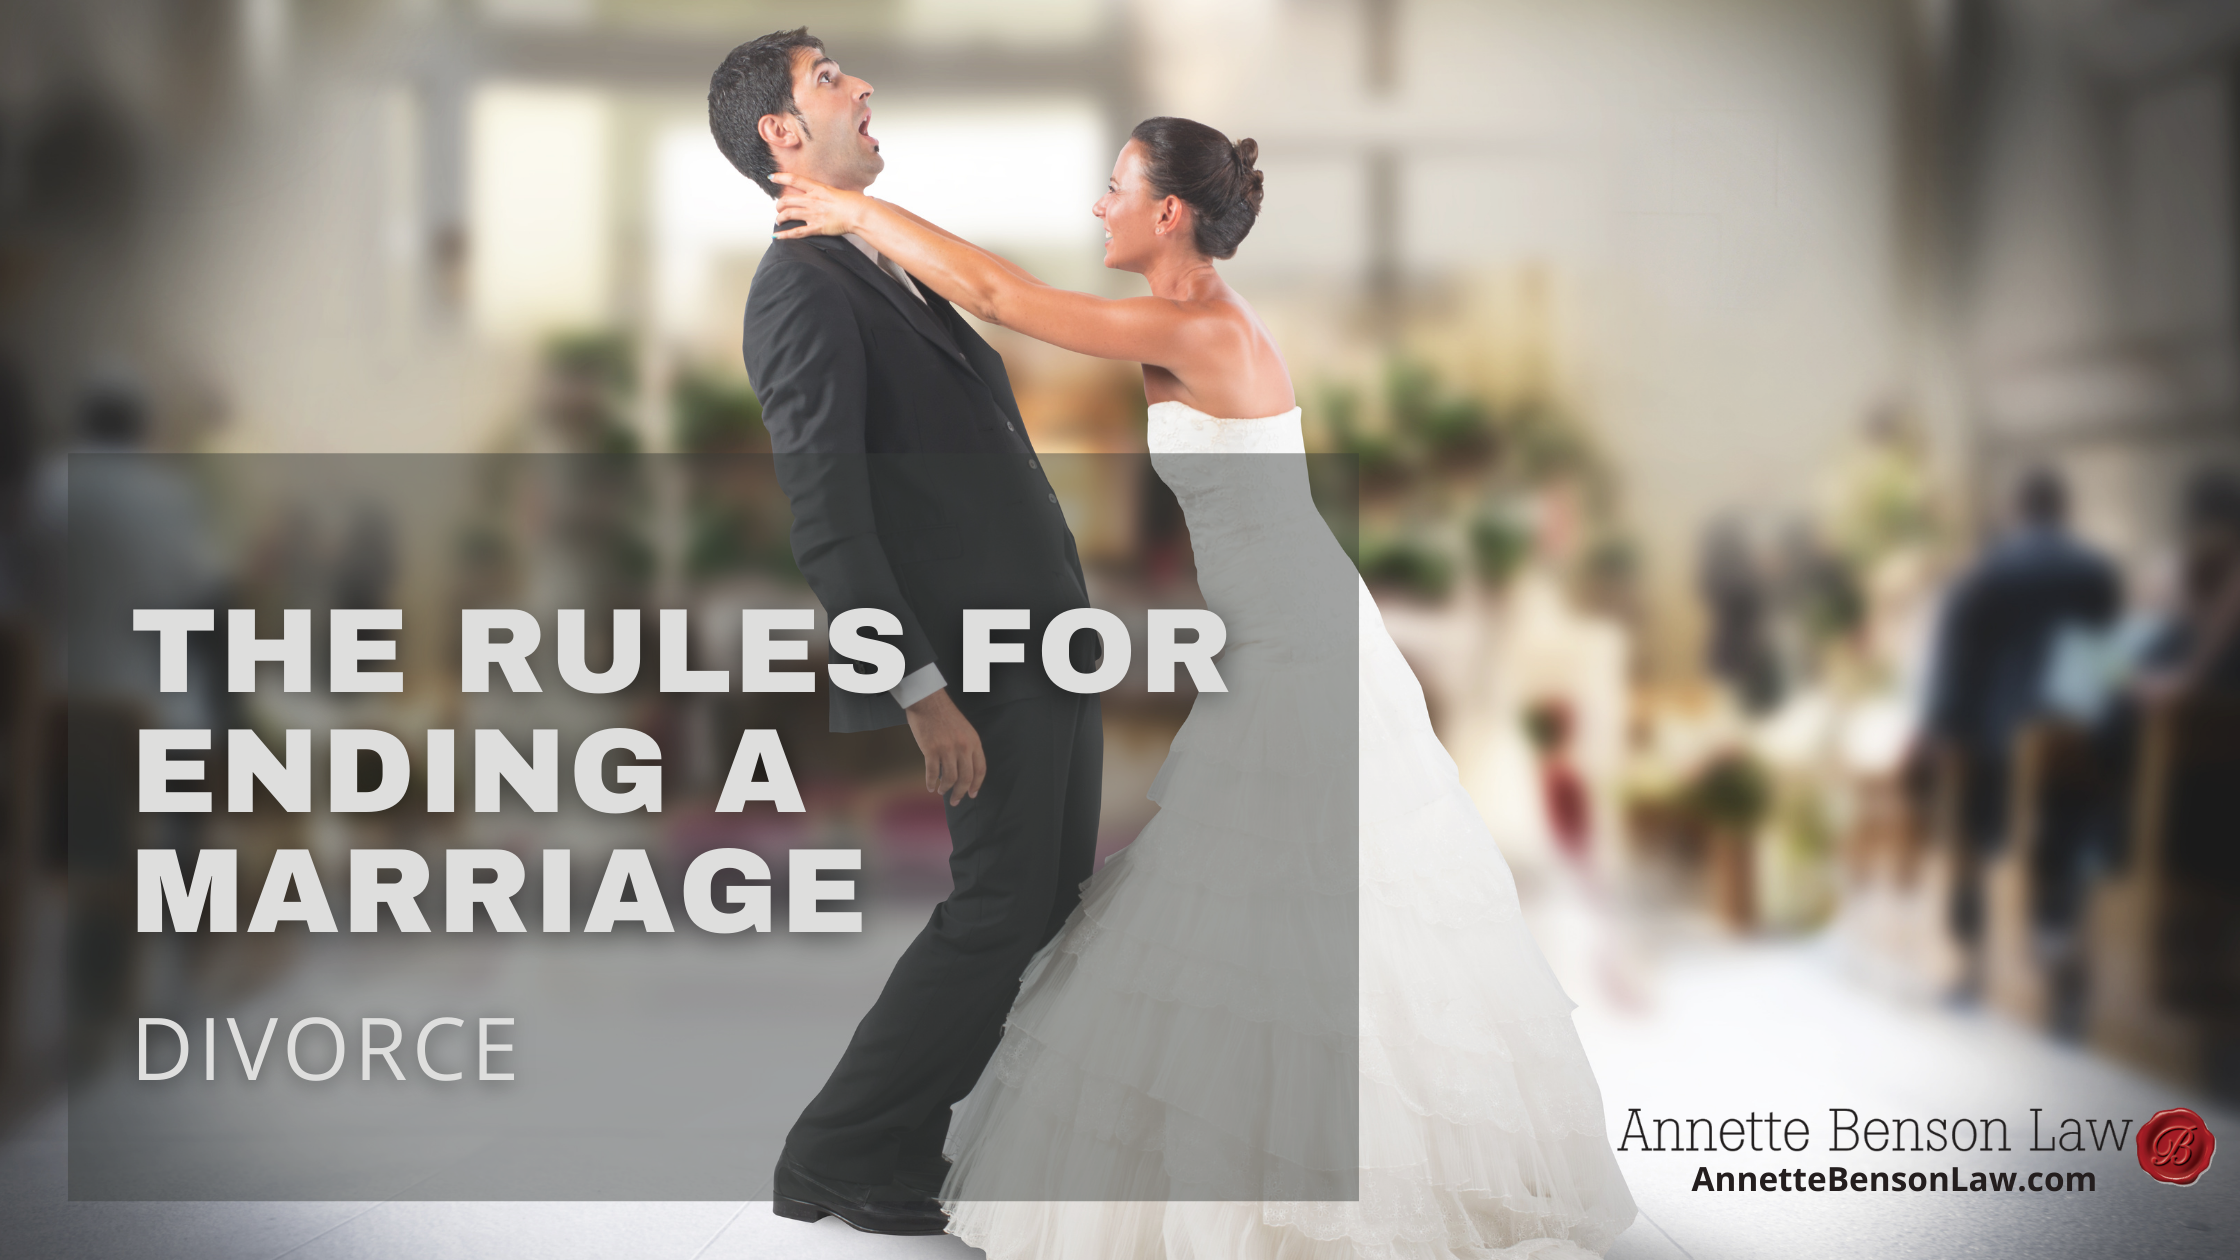 The Rules for Ending a Marriage